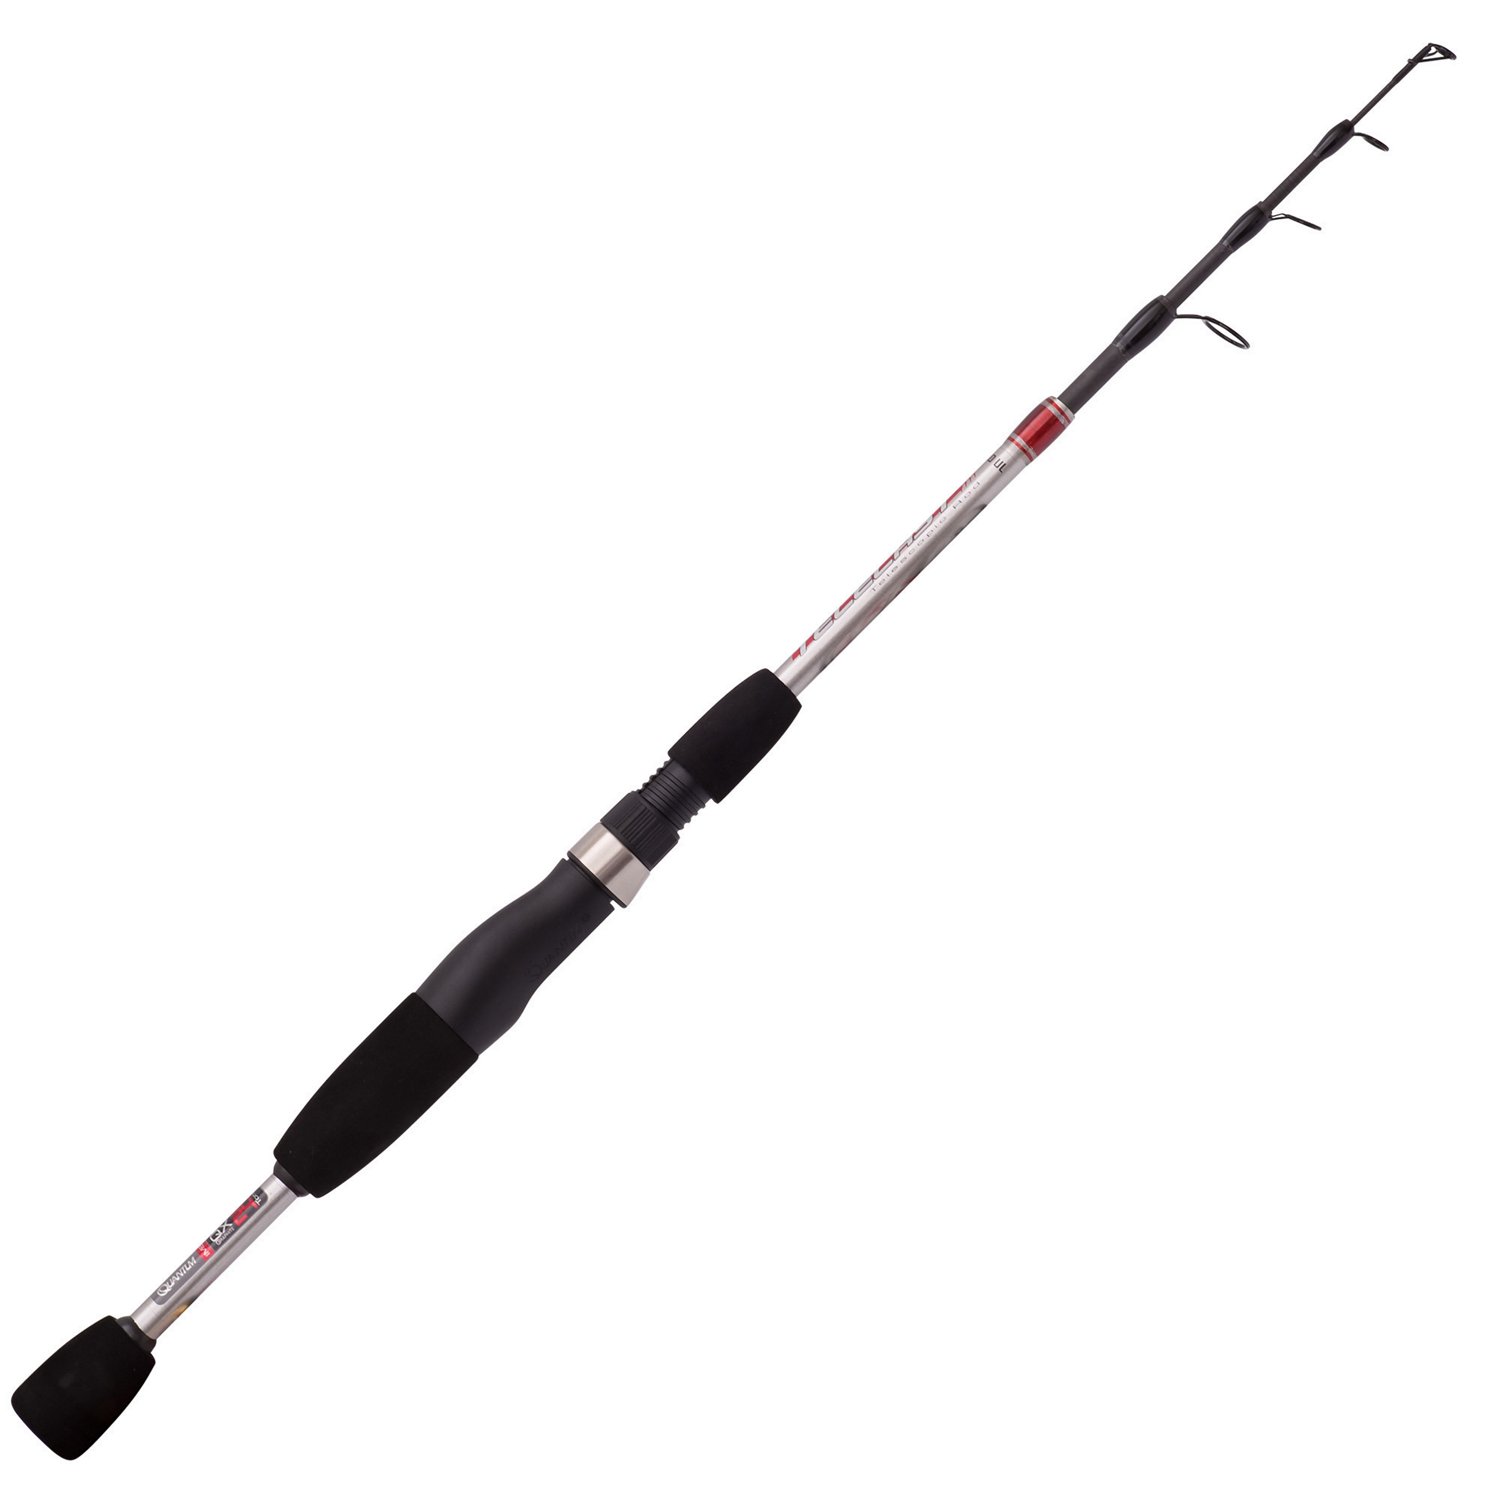  Fishing Rod Fishing Rod Professional Ultra-Light Fishing Pole  1.6-2.4m Telescopic Hand Rod Weight Spinning Casting Carbon Pole  Retractable : Sports & Outdoors